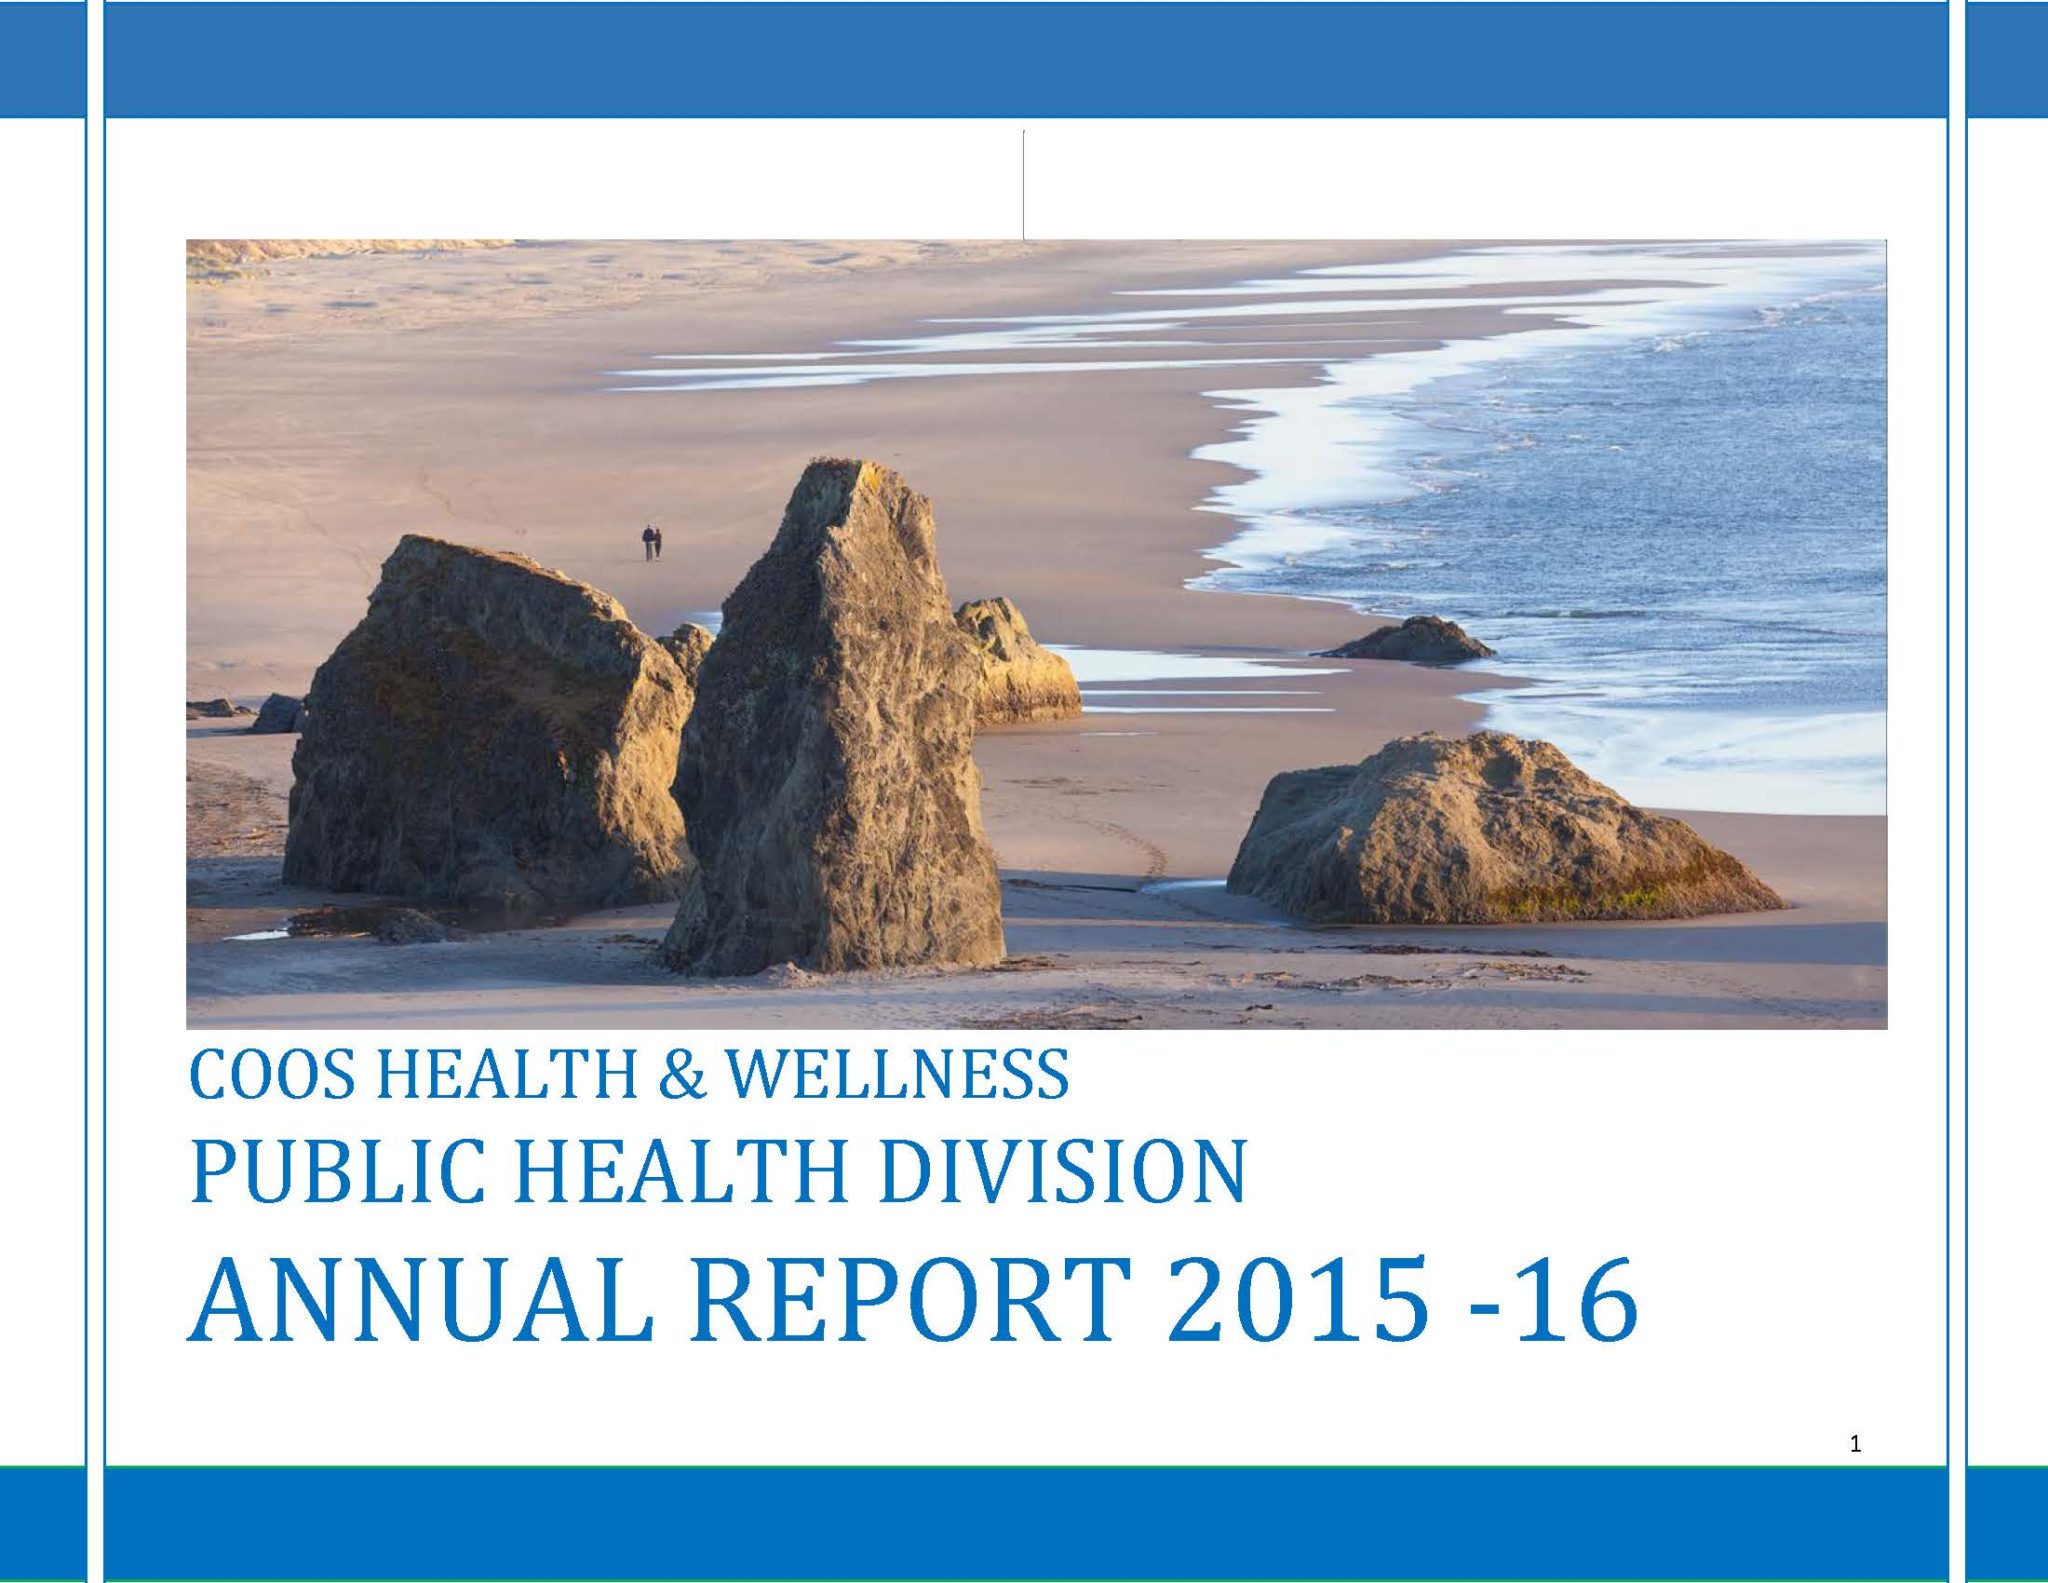 Annual Report 2015-2016 | Coos Health & Wellness